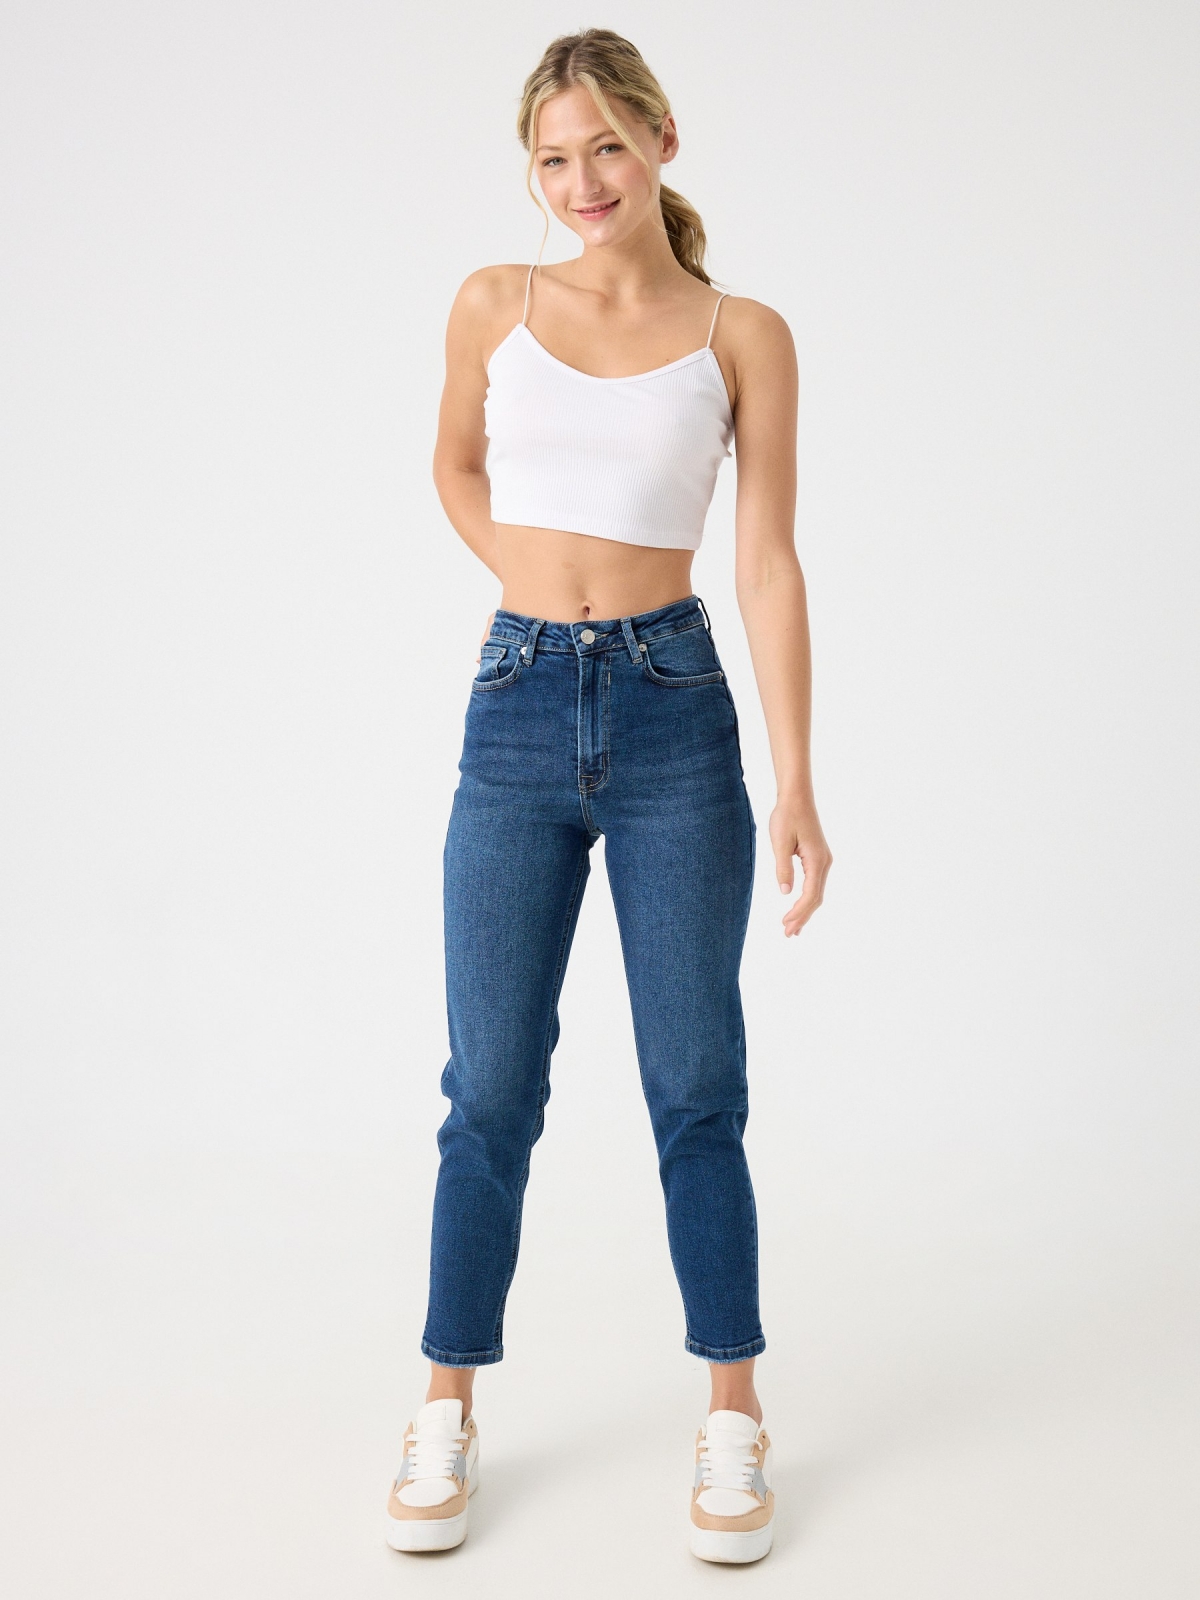 Basic slim fit mom jeans navy front view